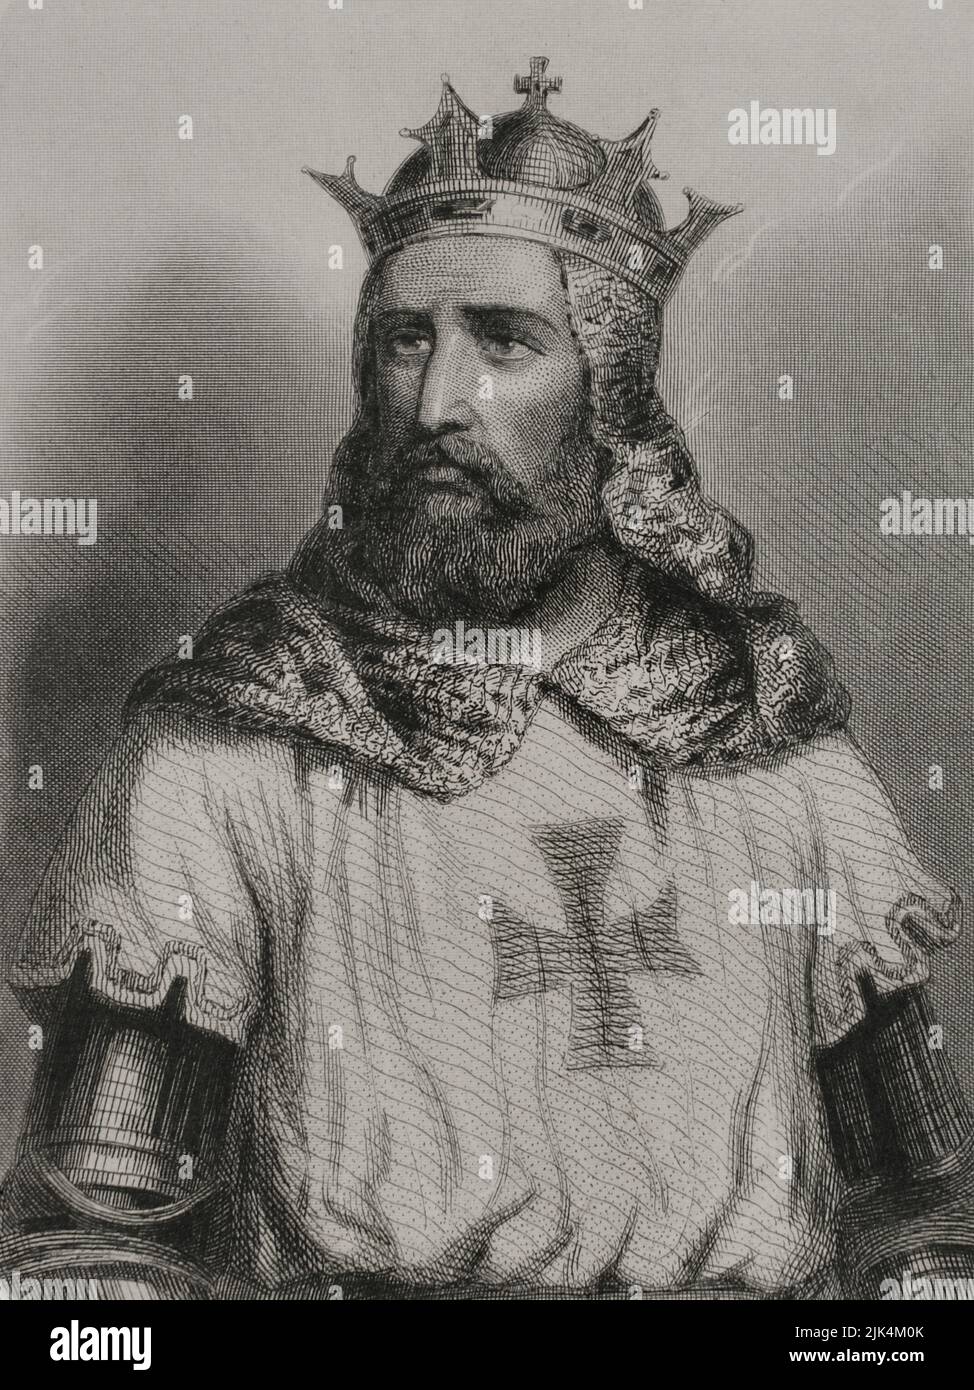 Godfrey of Bouillon (1060-1100). Military leader during the First Crusade. First ruler of the Kingdom of Jerusalem (1099-1100), choosing for his mandate the title of 'Defender of the Holy Sepulchre'. Portrait. Engraving by Geoffroy. 'Historia Universal', by César Cantú. Volume III, 1855. Stock Photo